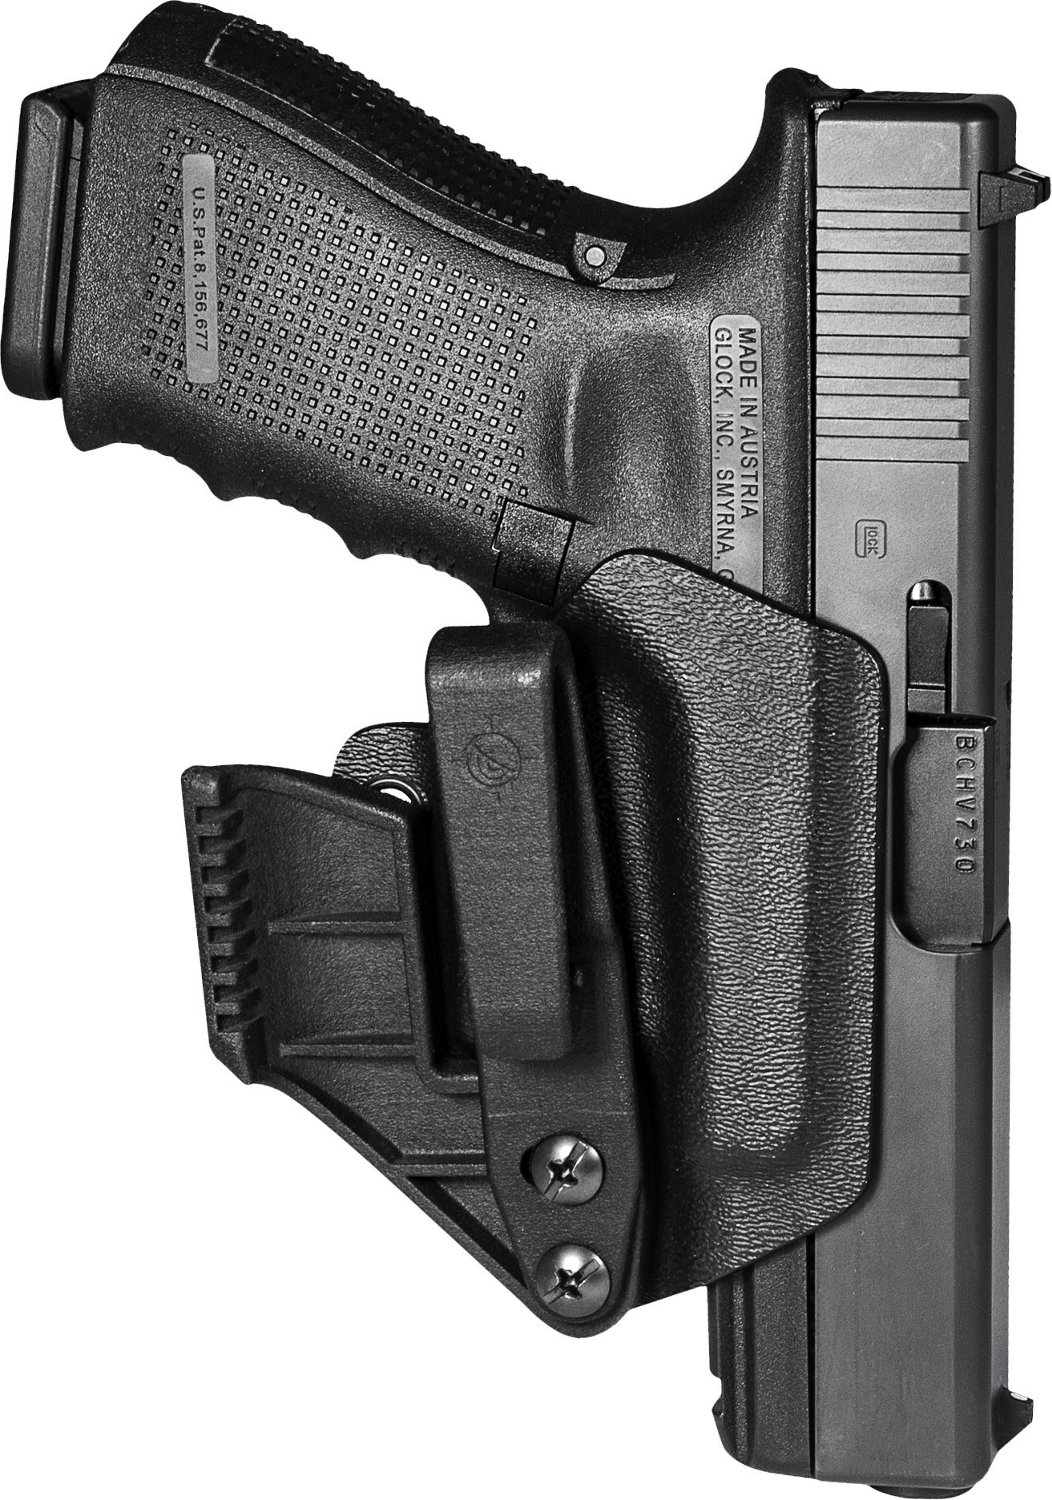 Glock Holsters With Flashlight